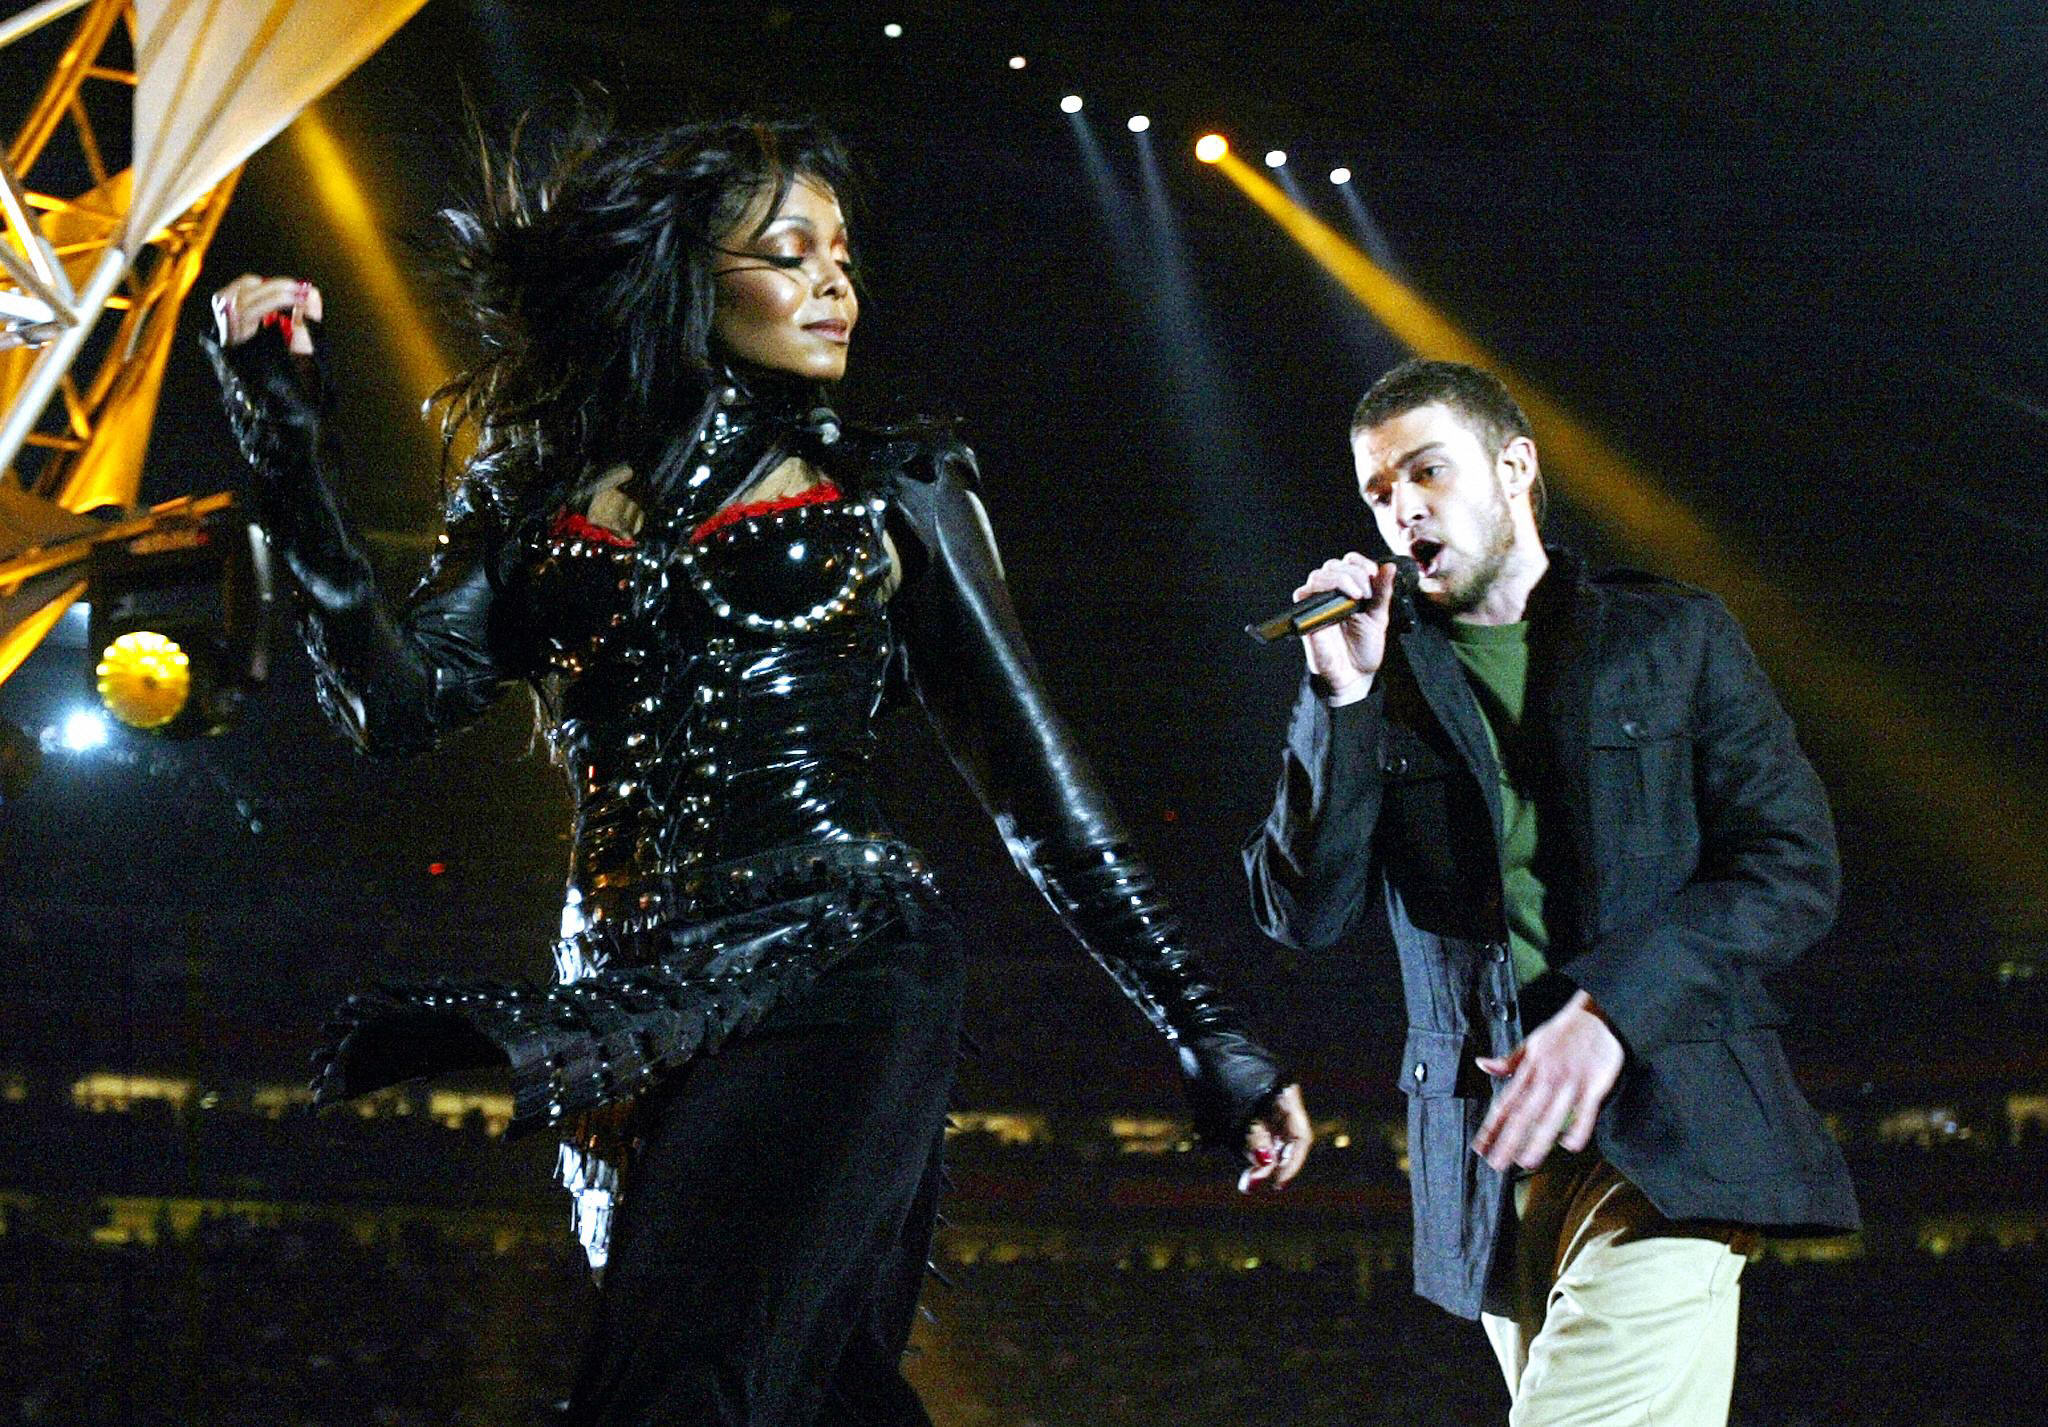 Janet Jackson and Justin Timberlake perform at the Super Bowl halftime show in 2004.  (Credit: Jeff Haynes/AFP via Getty Images)